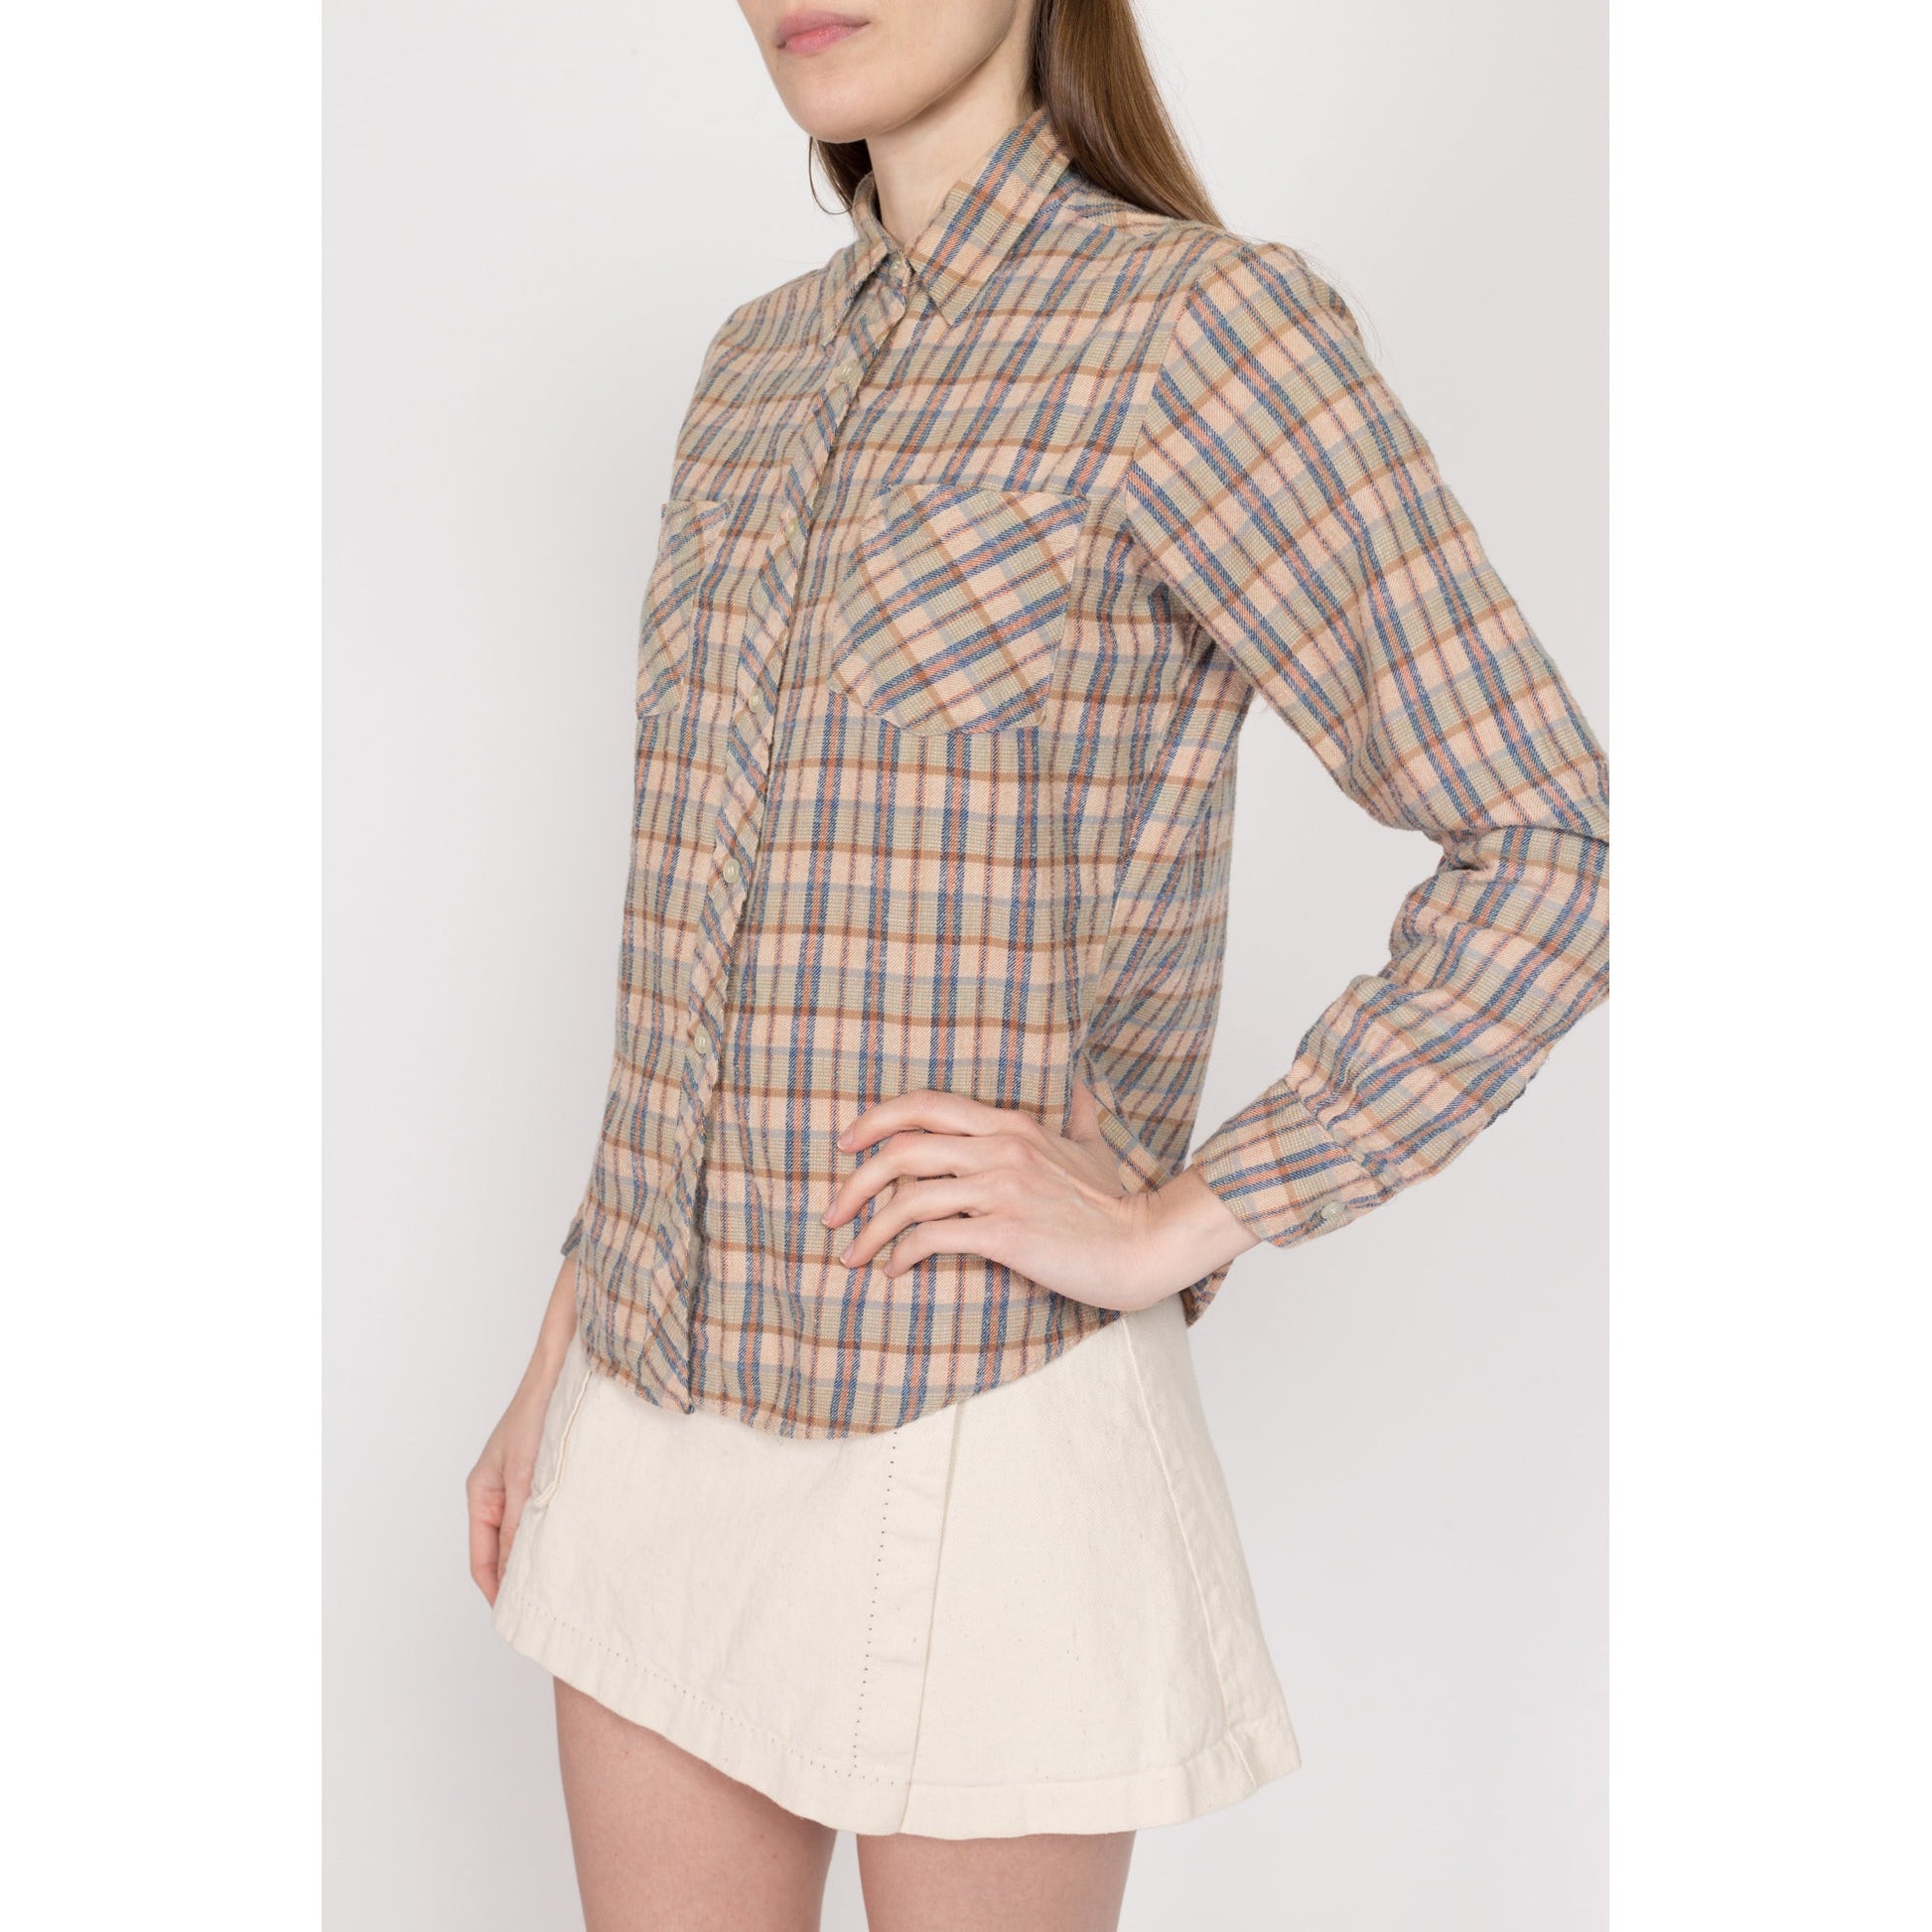 XS 70s Tan Plaid Flannel Shirt | Vintage Button Up Long Sleeve Collared Top